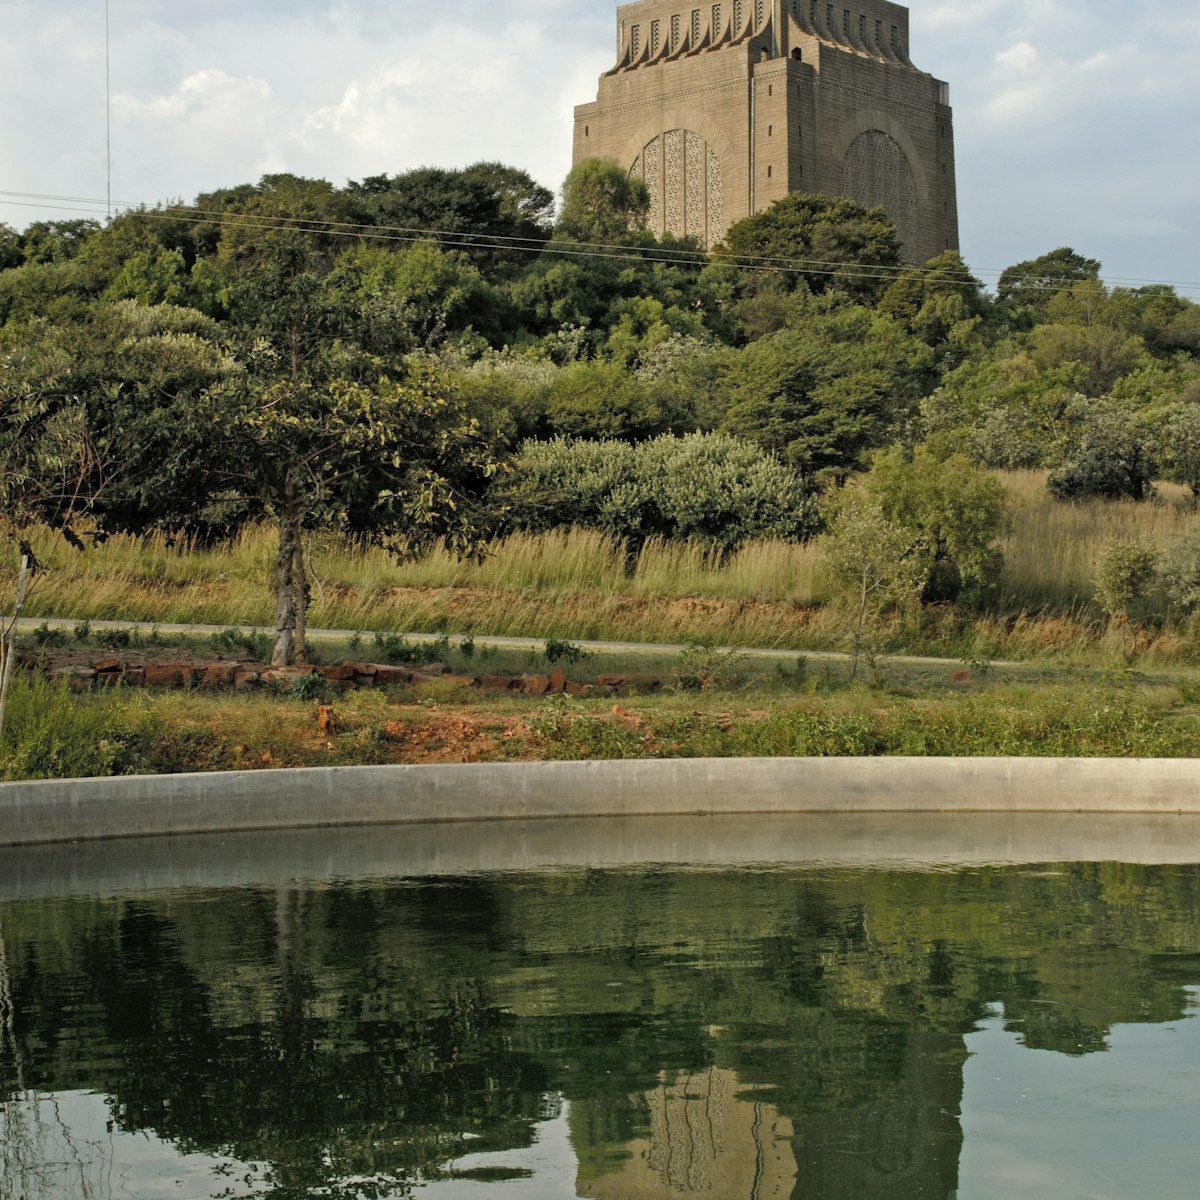 The Voortrekker Monument on a hill to the south of Pretoria, South Africa